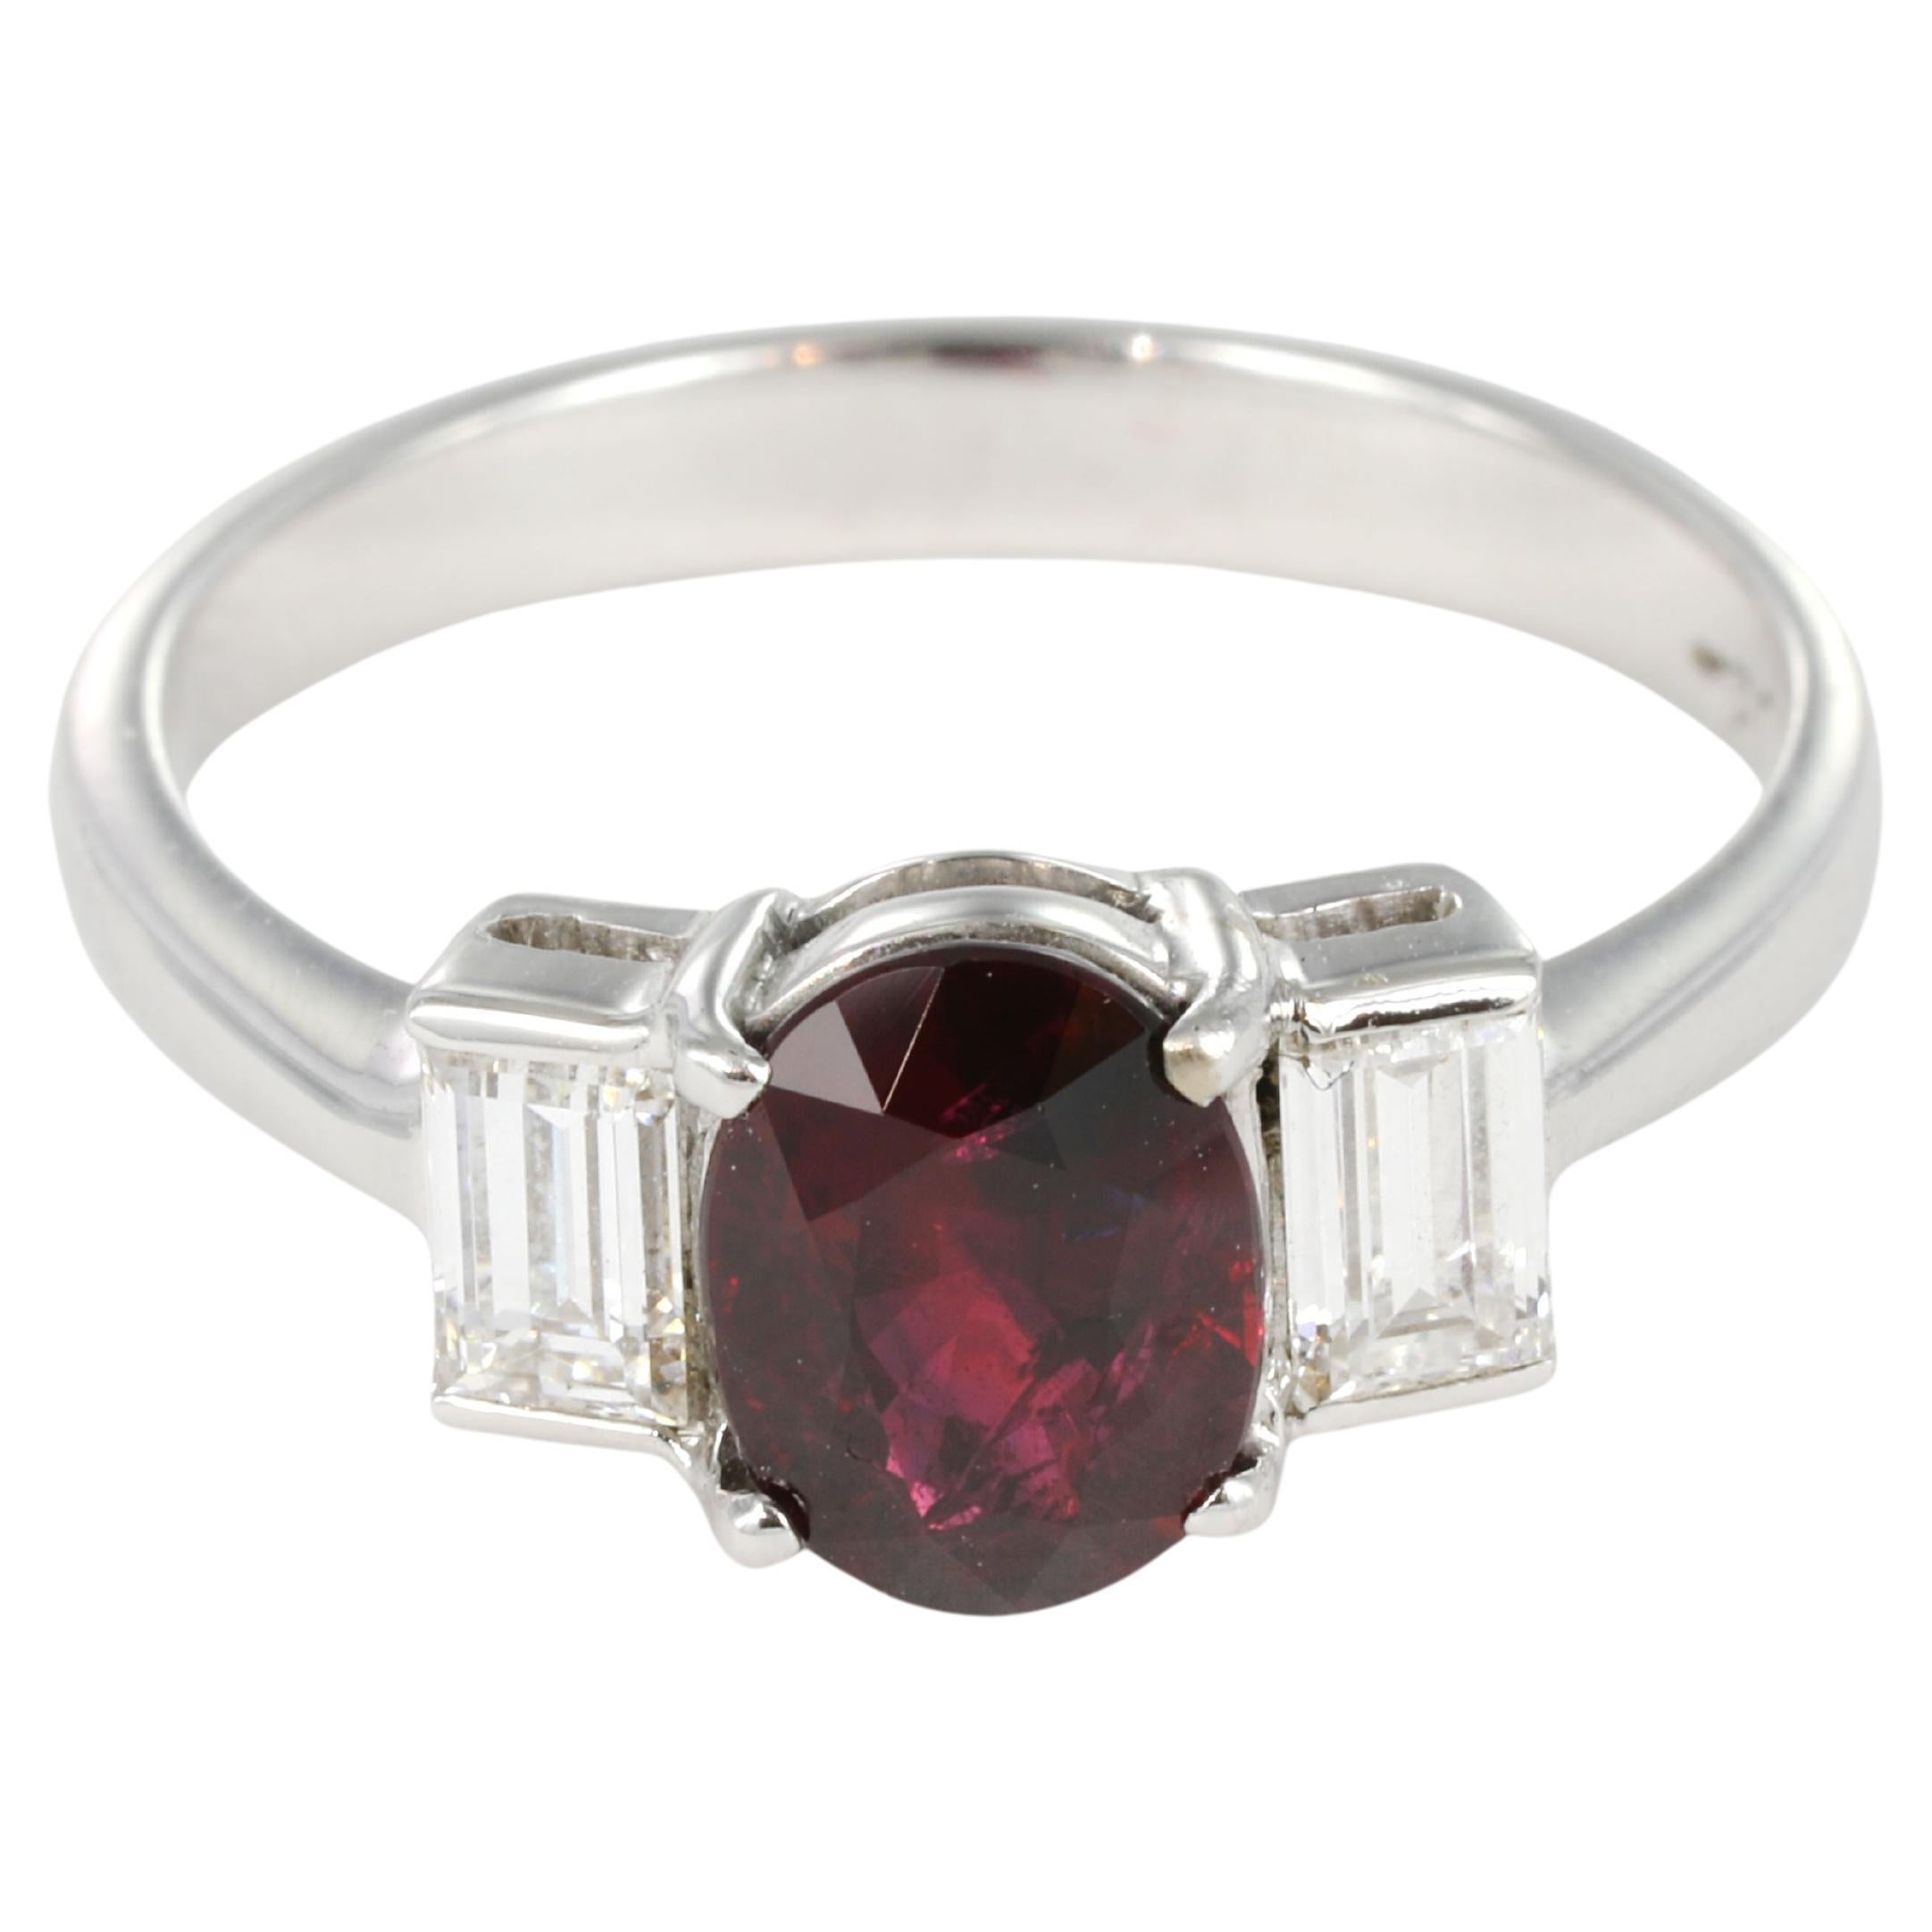 Unheated 1.54 Carat “Pigeon’s Blood” Ruby & Diamond 18K Gold Ring, GIA Certified